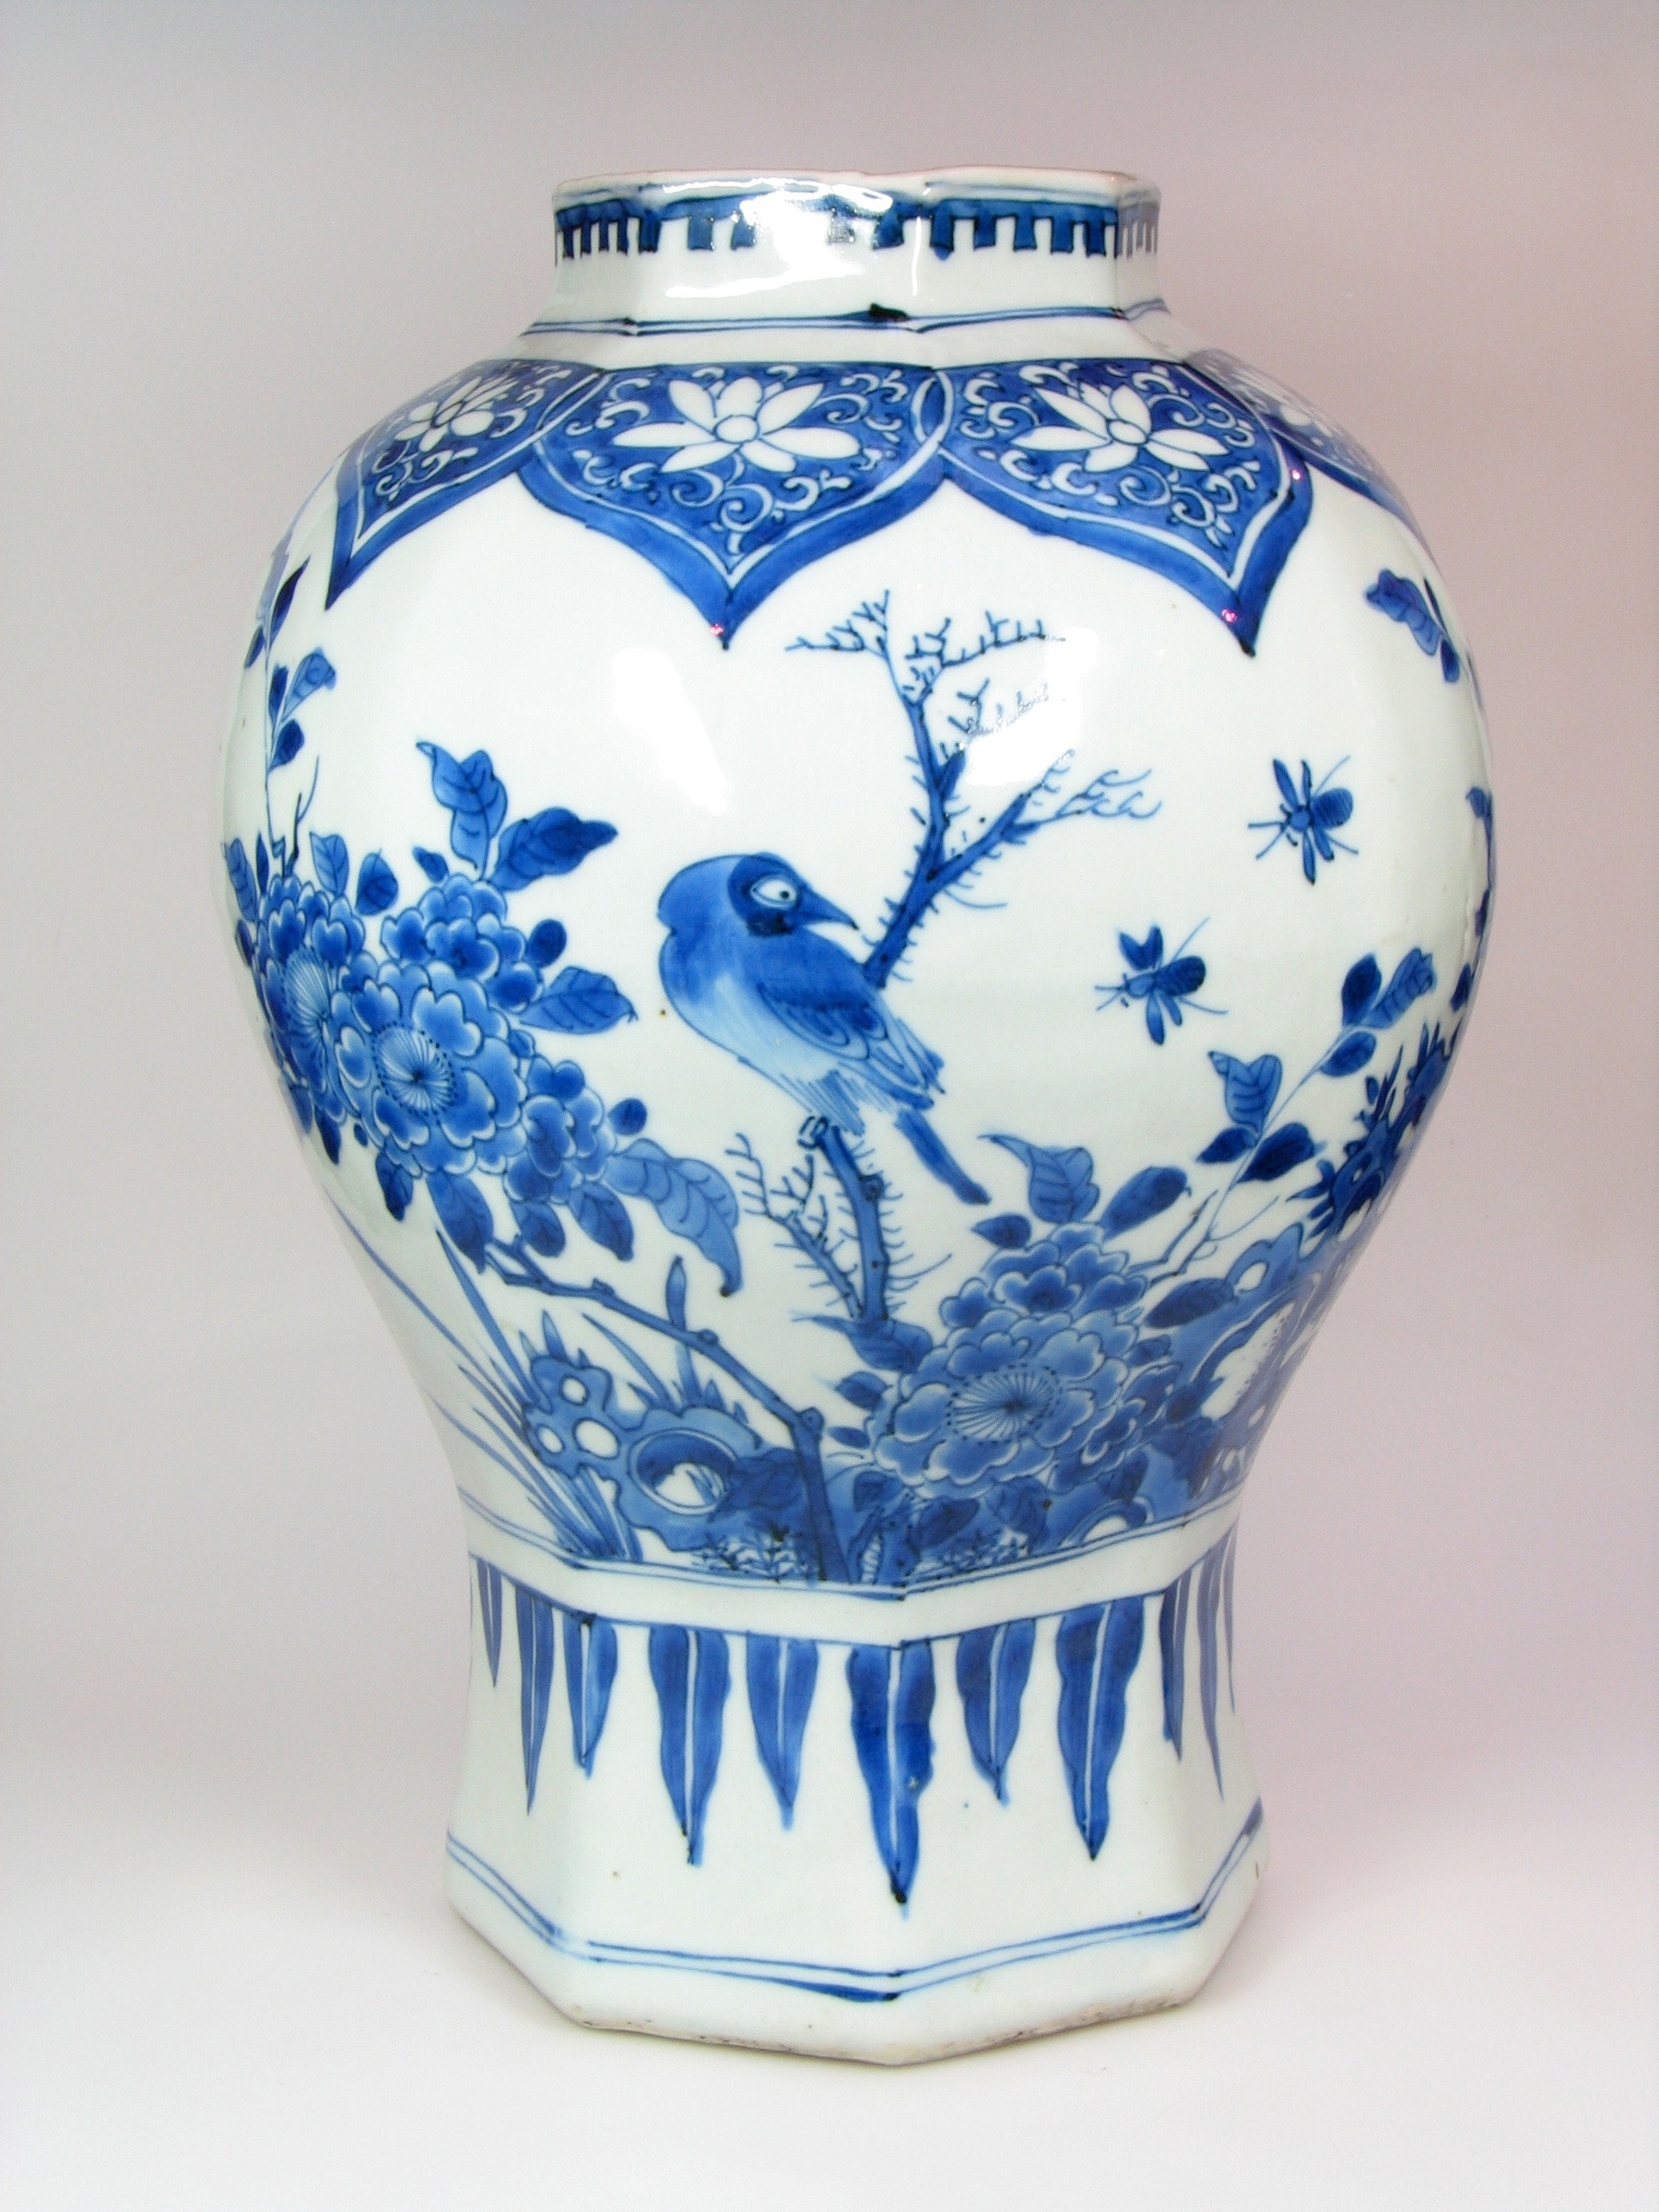 12 attractive Chinese Flower Vase 2024 free download chinese flower vase of a fine chinese blue white vase transitional 1630 1660 anita gray regarding a fine chinese blue white vase